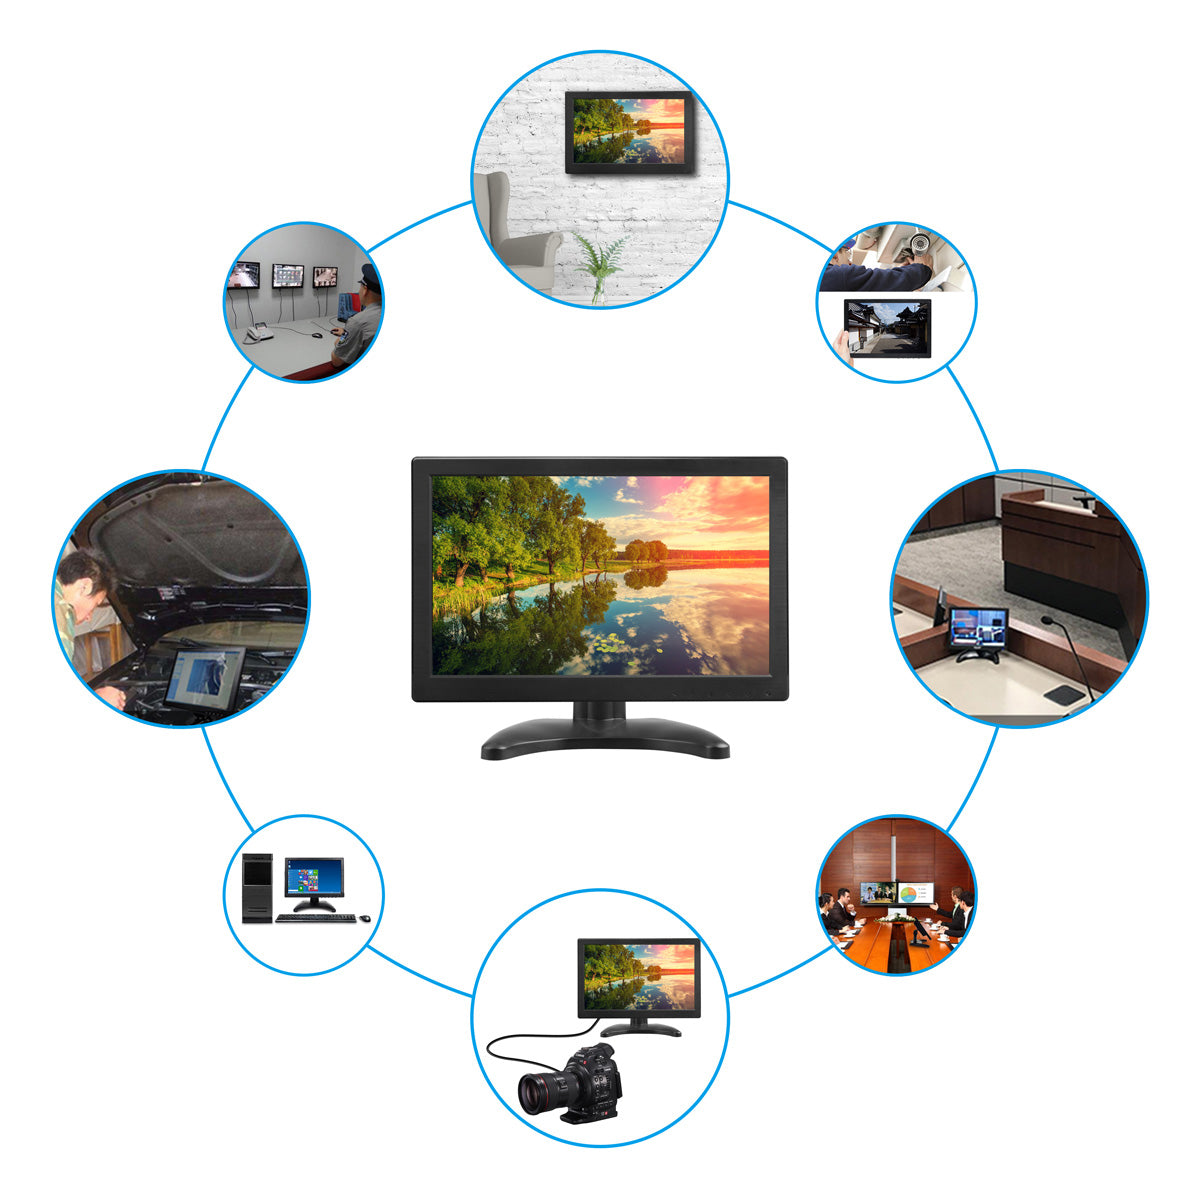 Campark D126 12" 1366x768 HDMI Monitors, LCD Display w/Speaker, HDMI/VGA/AV Port for PC/Security/CCTV System/Raspberry Pi（Only Available In Europe）